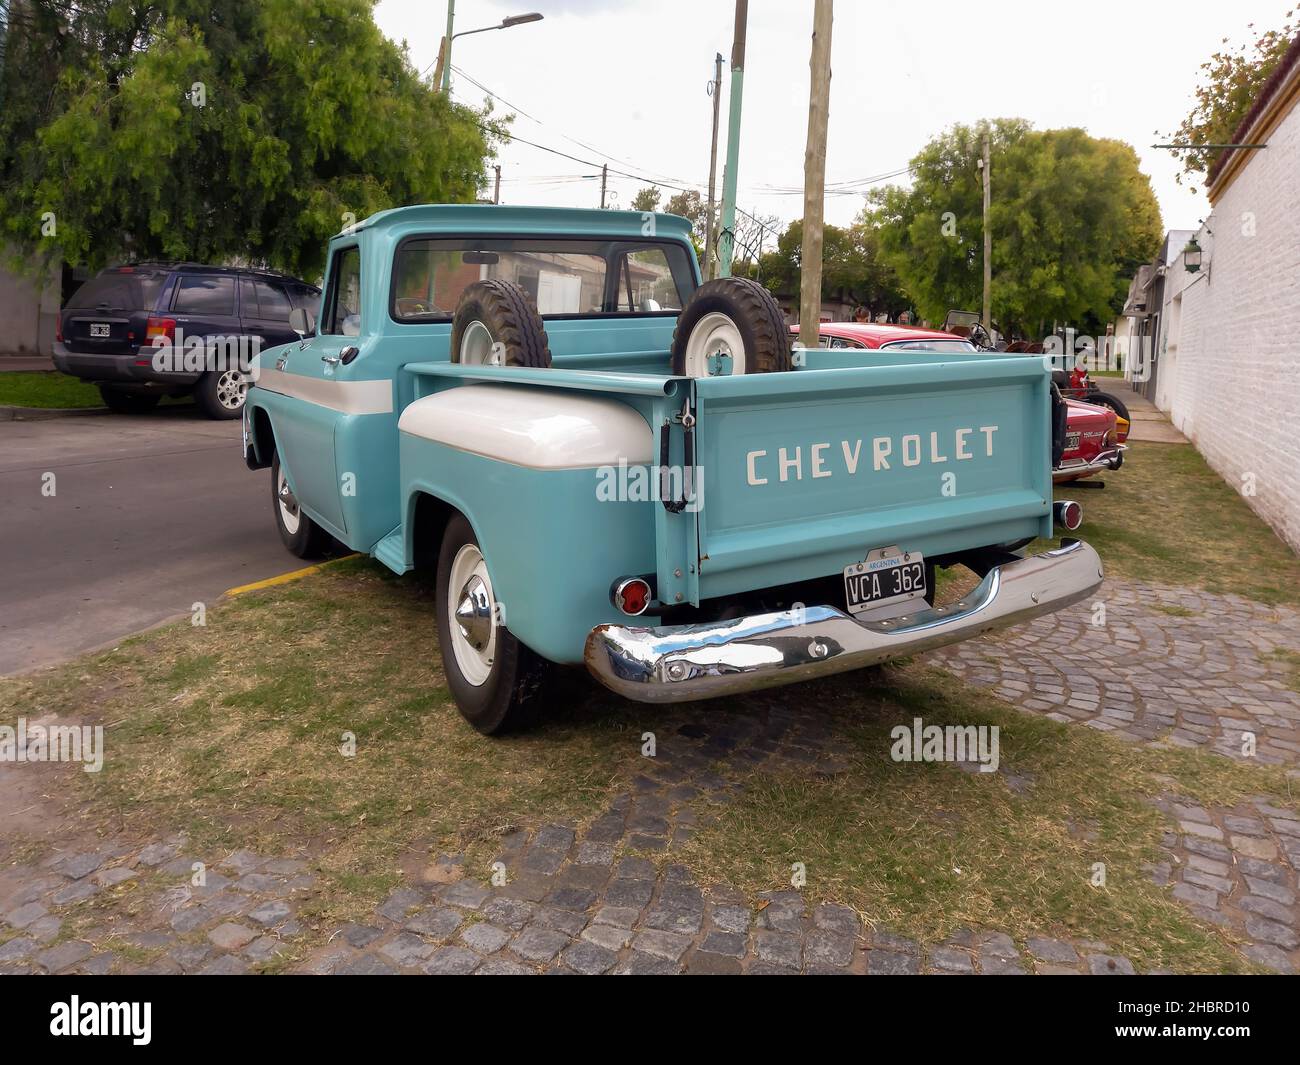 LOMAS DE ZAMORA - BUENOS AIRES, ARGENTINA - Dec 05, 2021: old Chevrolet Chevy C10 Apache Brava pickup truck late 1960s by GM Argentina. Rear left view Stock Photo